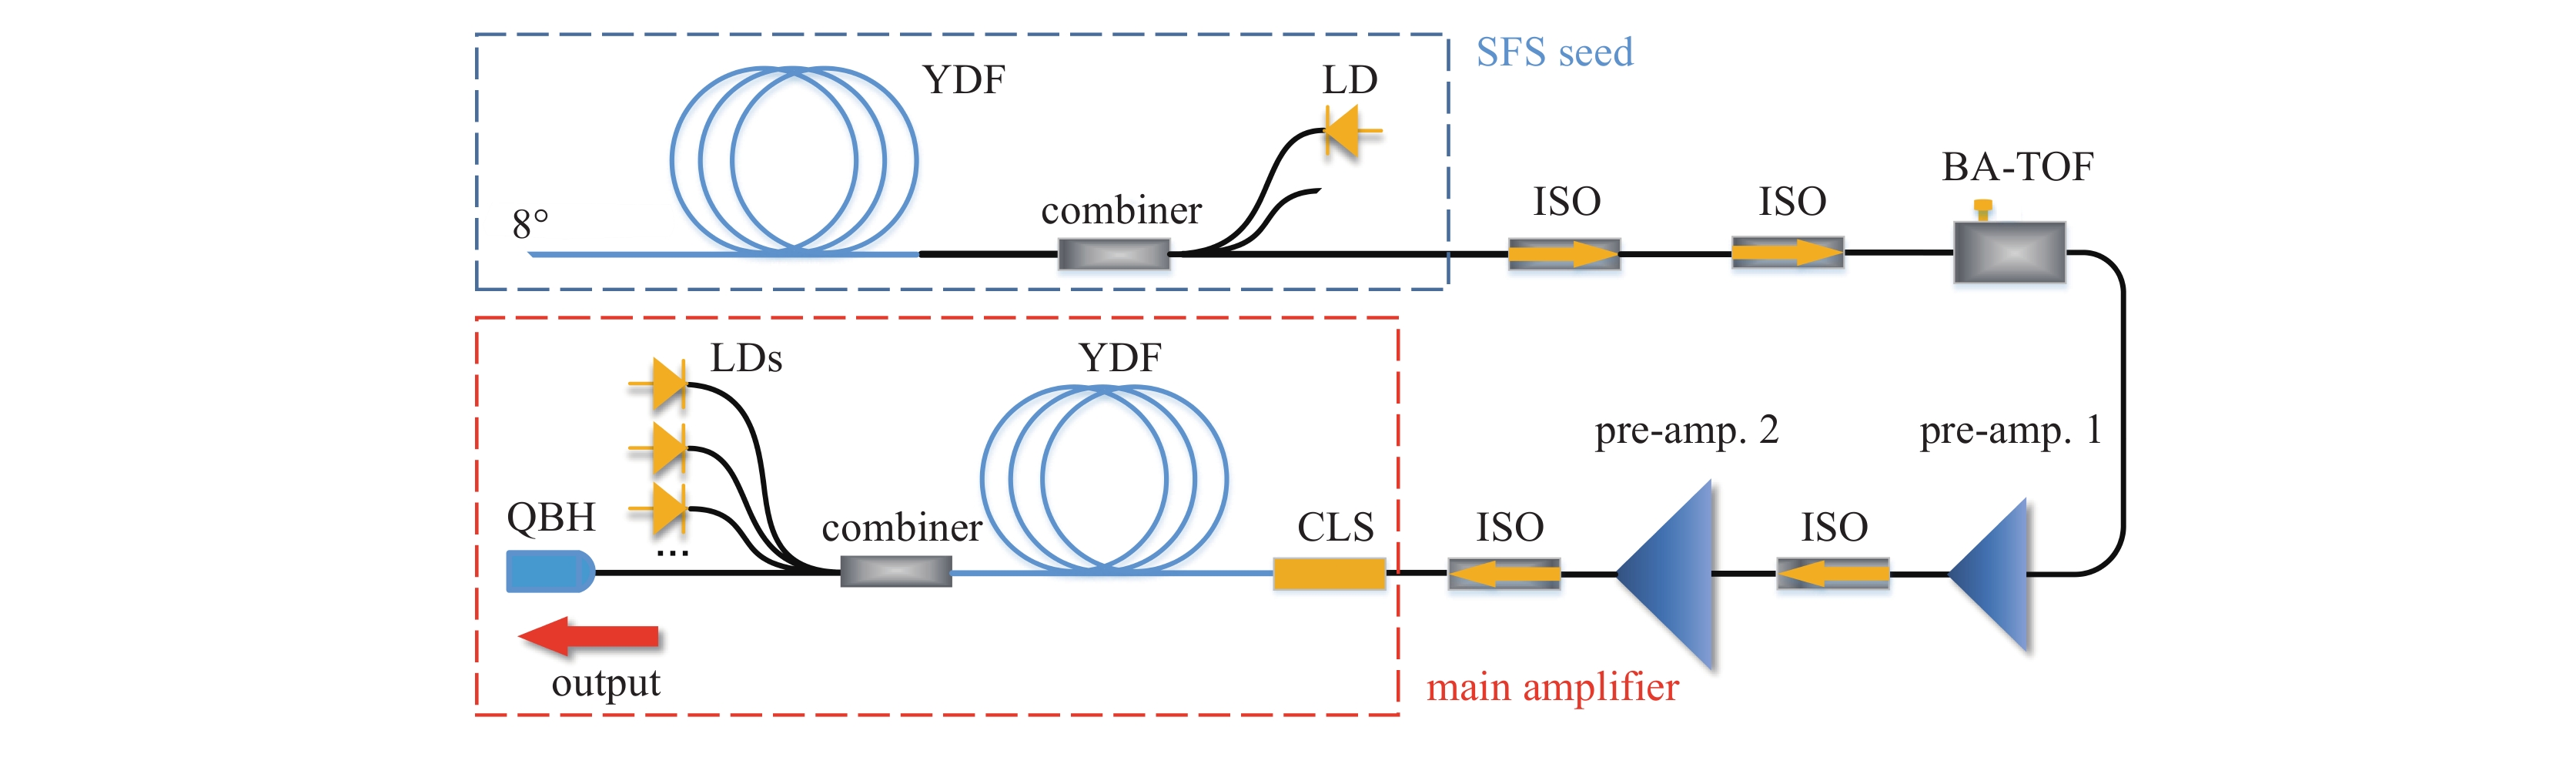 Experimental setup of the linewidth- and wavelength-tunable high-power fiber laser